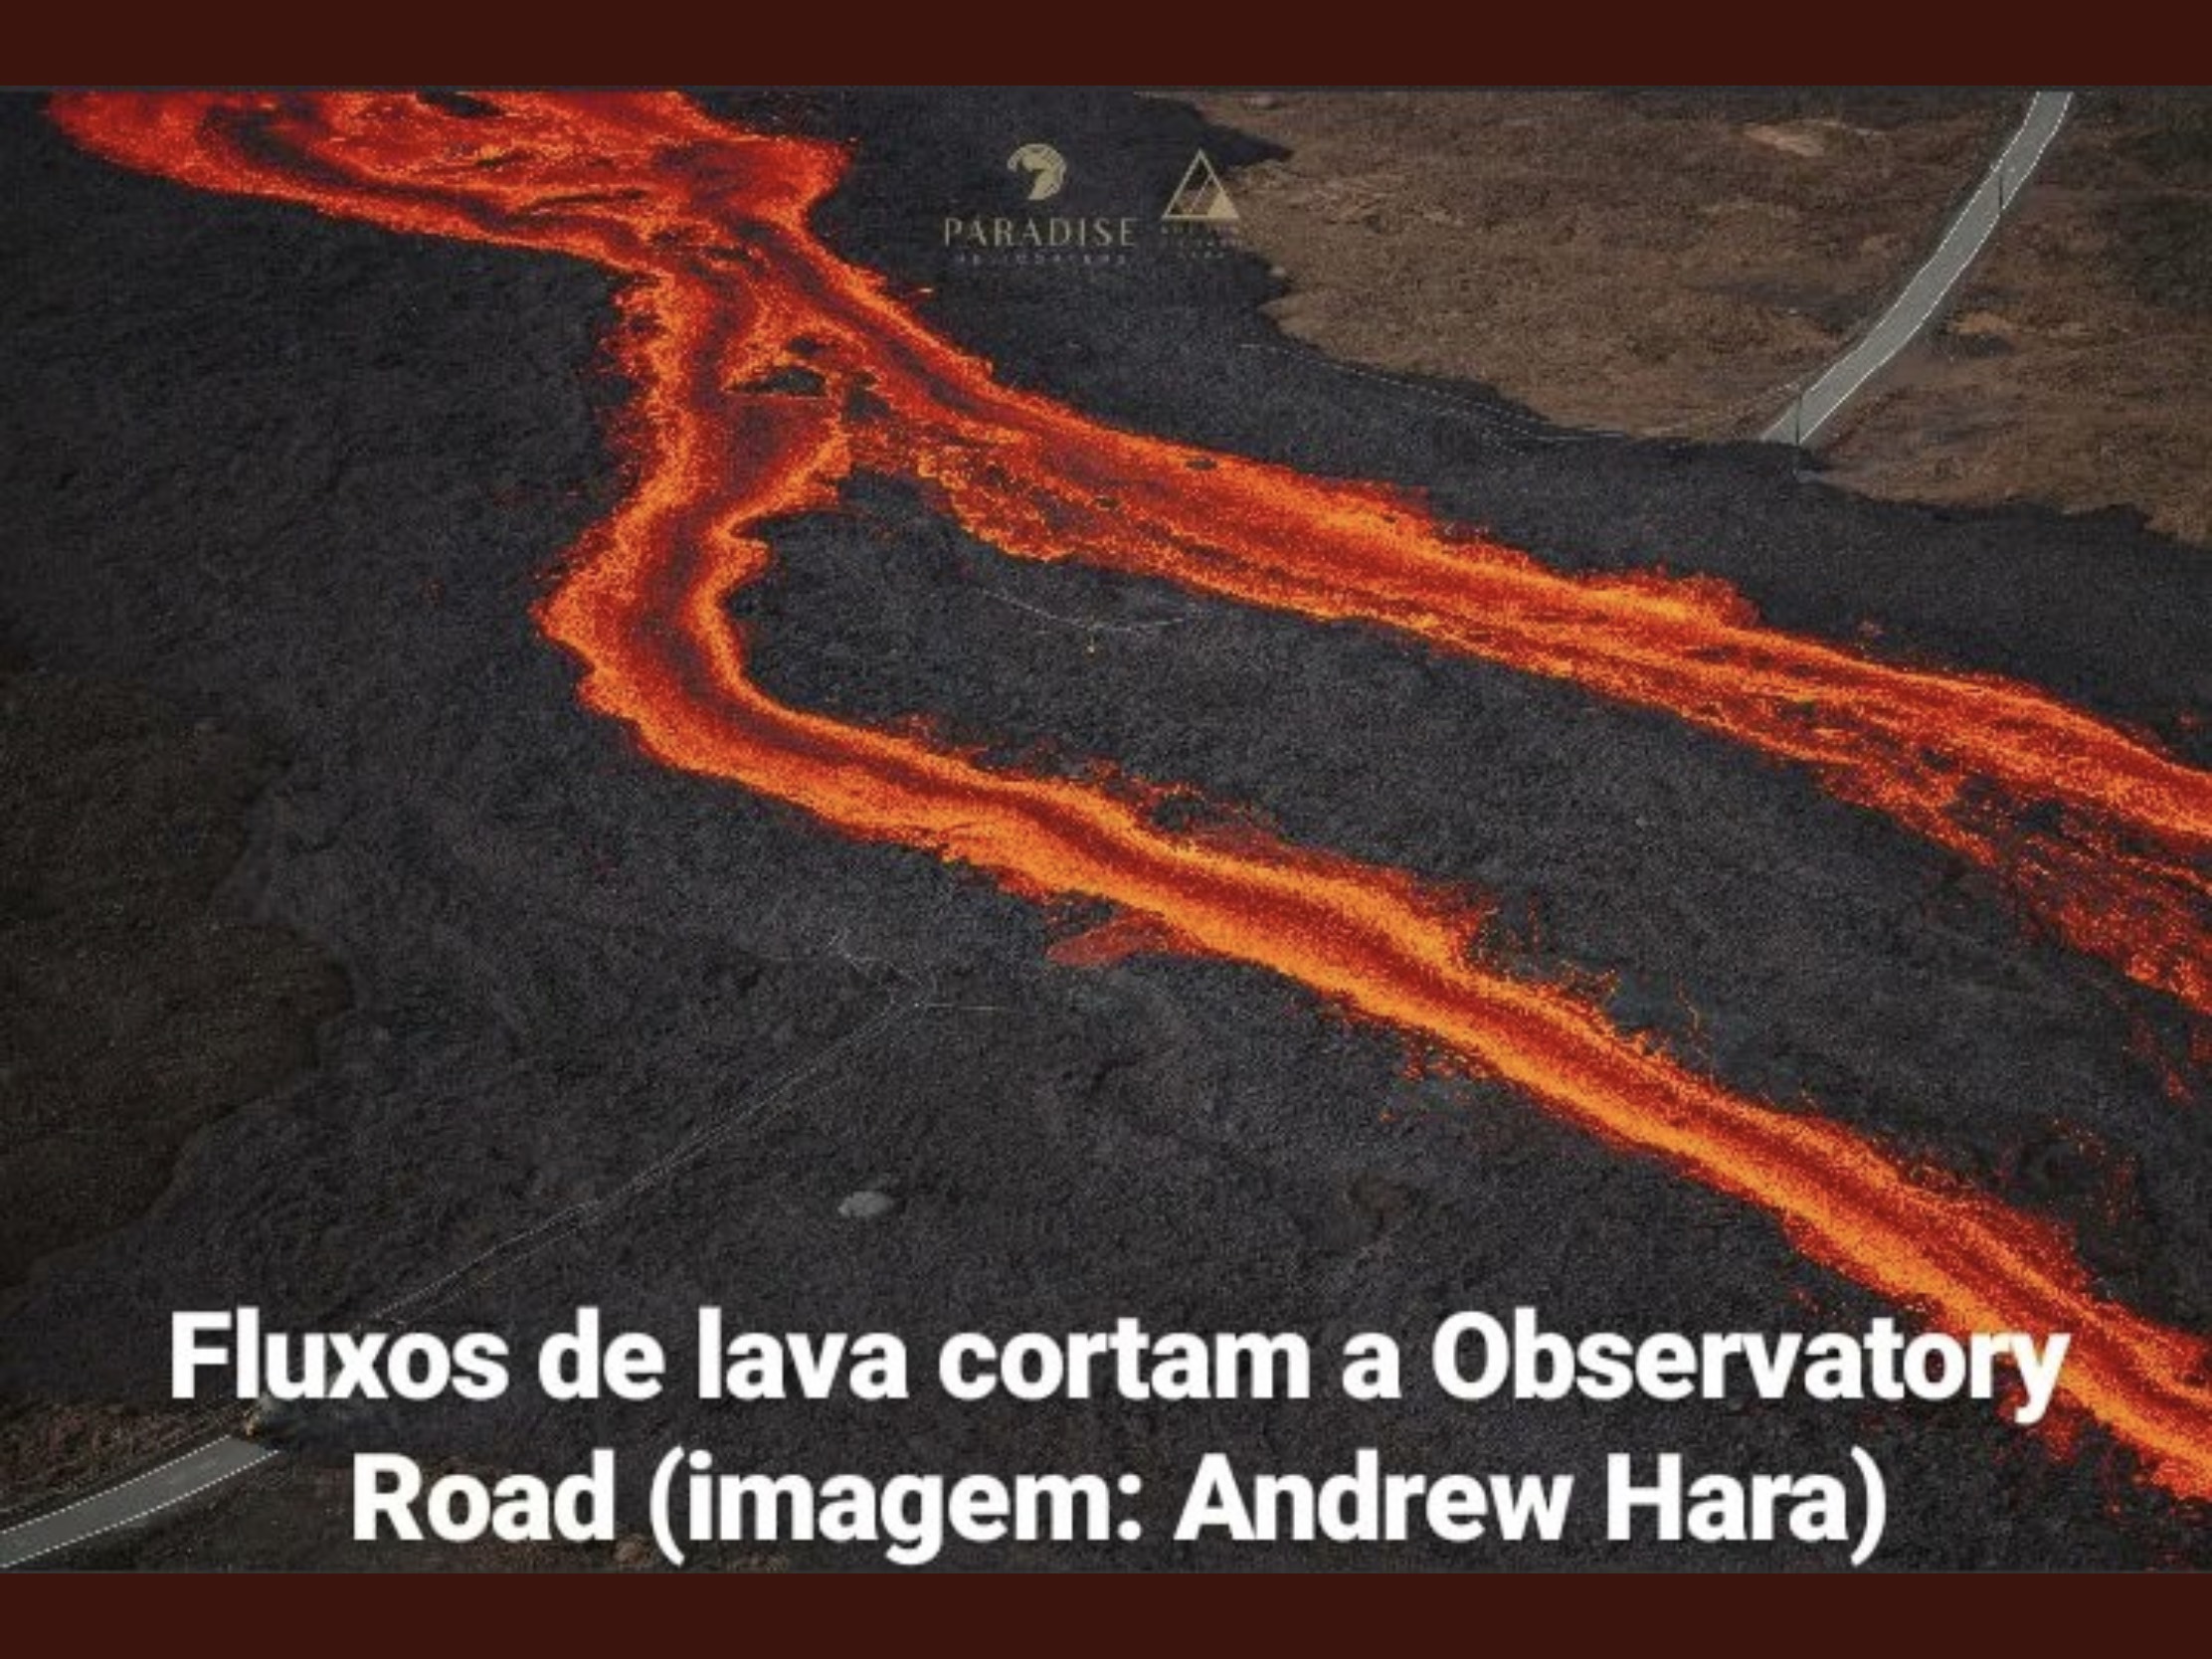 Helicopter view of the Mauna Loa lava flow over the access road.